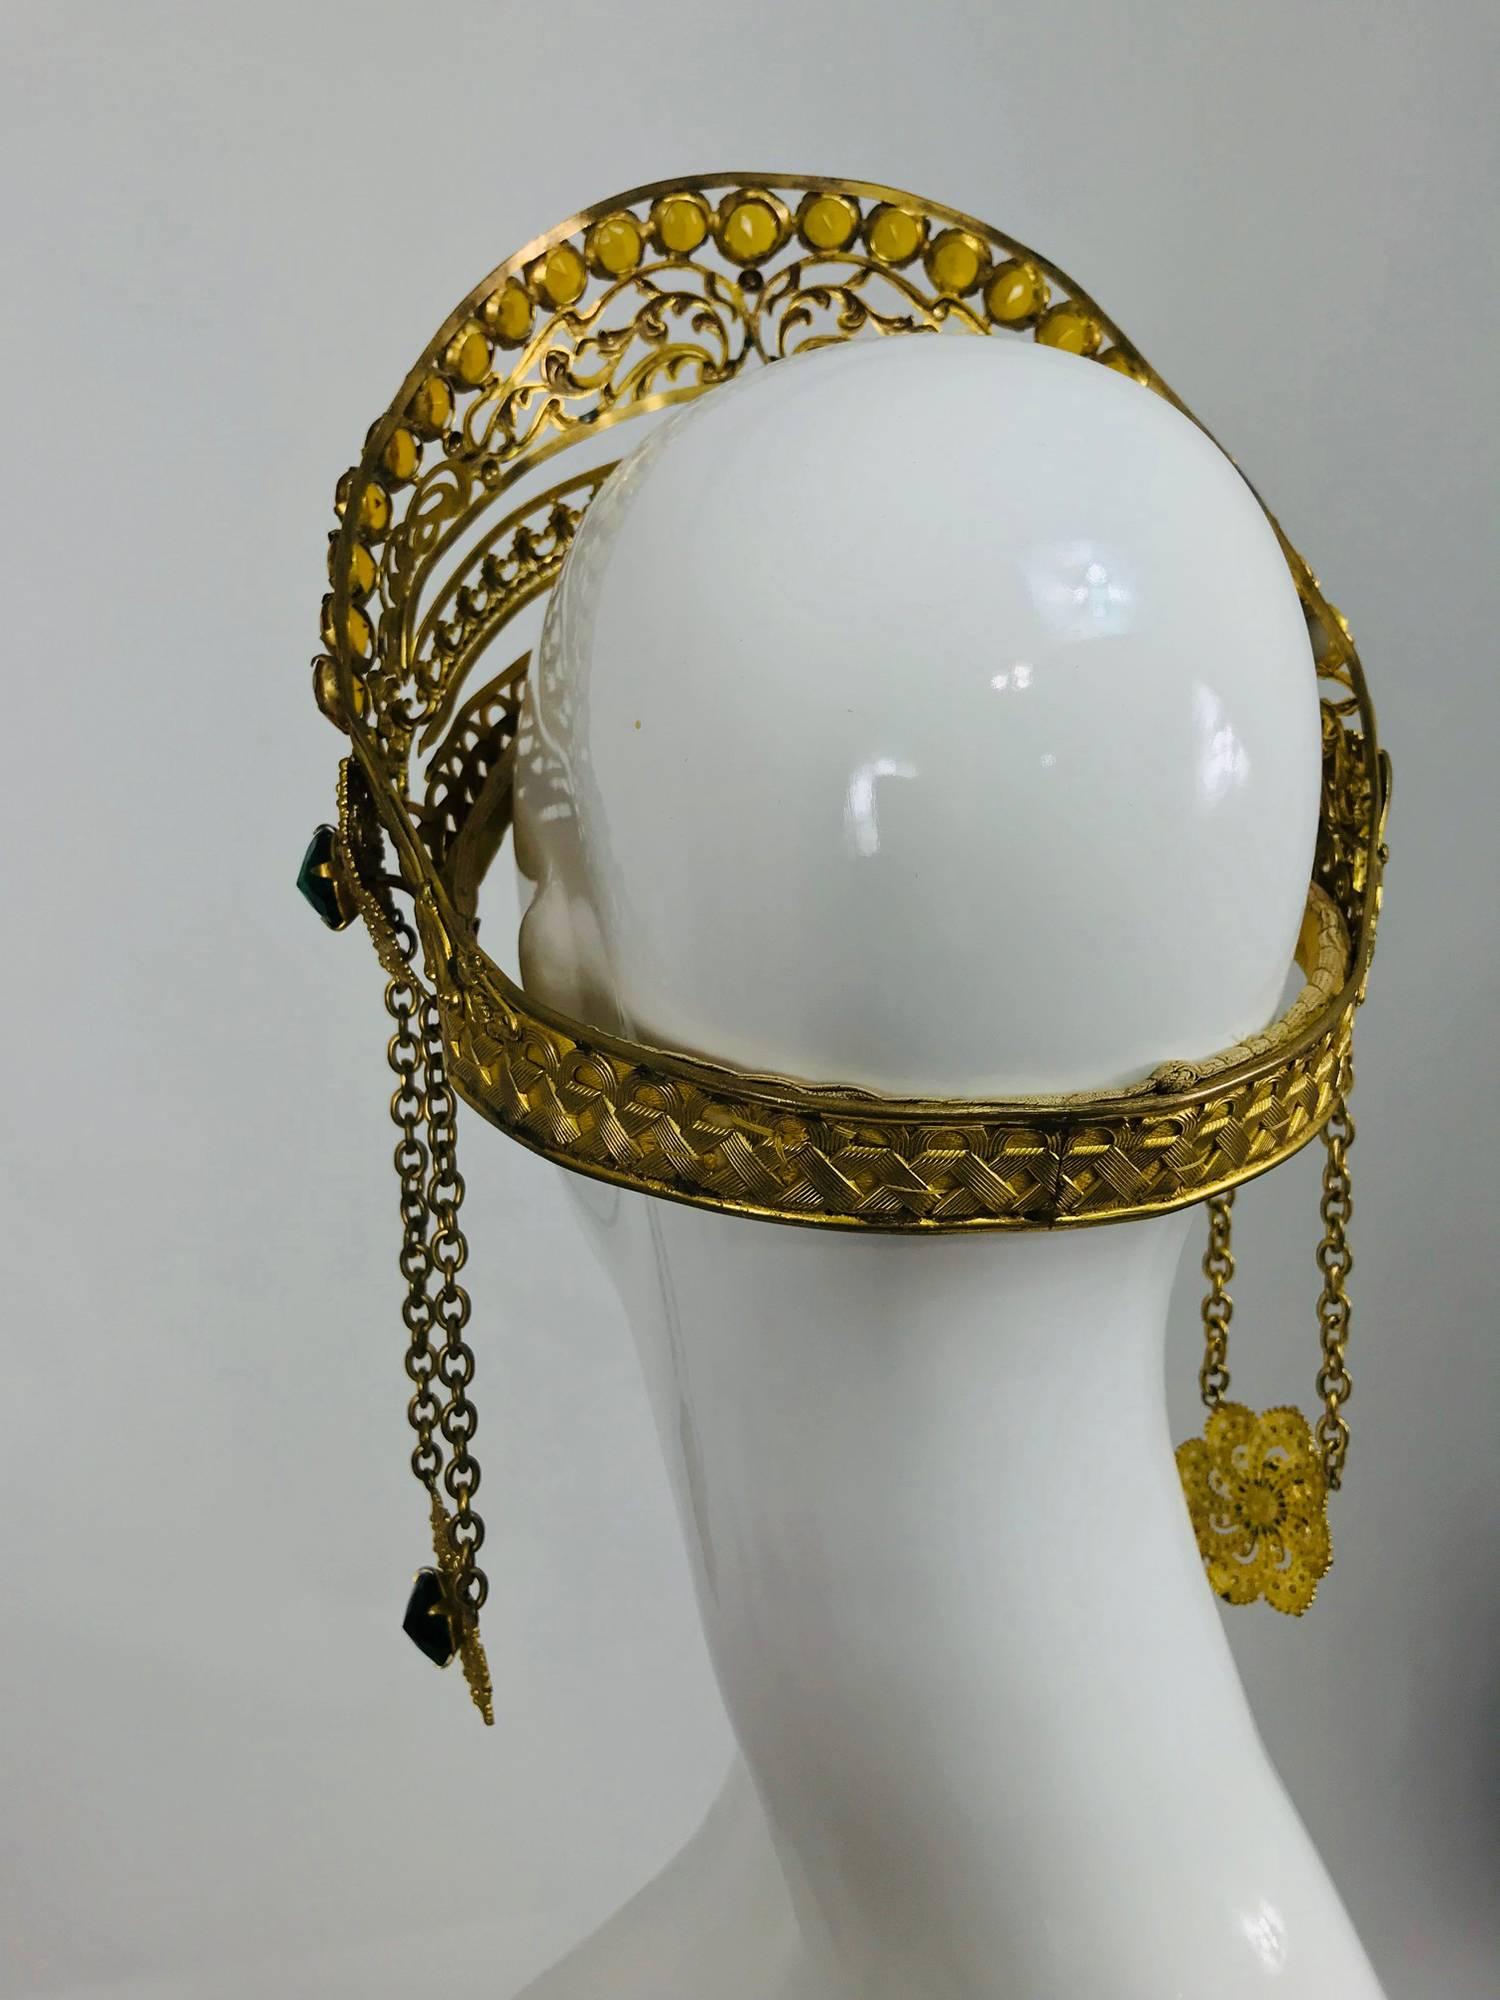 Men's Rare Crown headdress gilt metal with jewels and side drops early 1900s